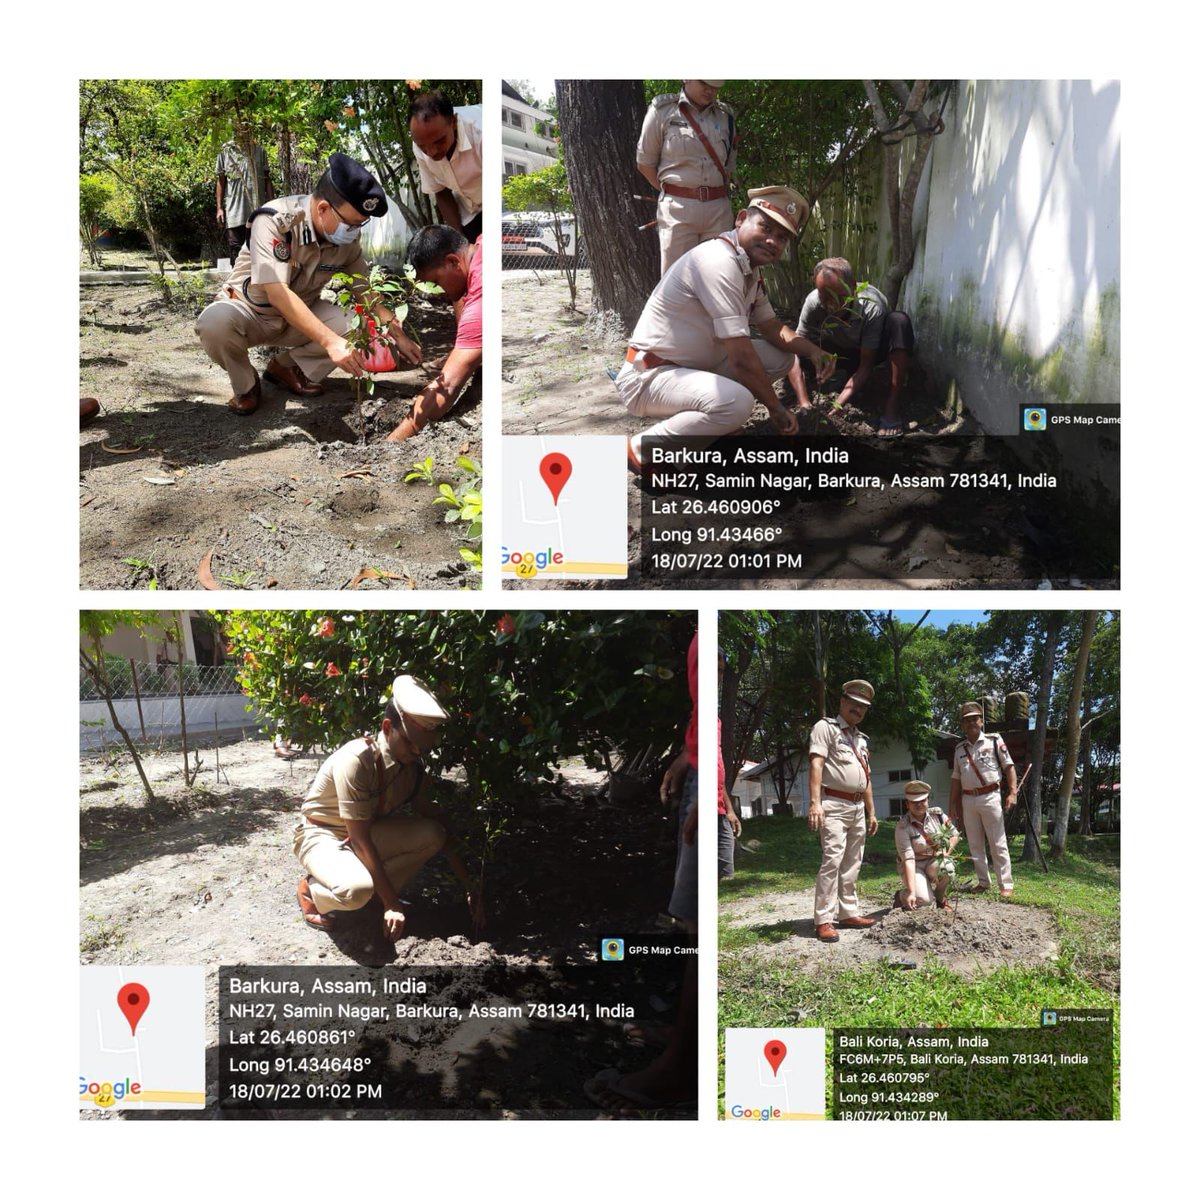 As part of institutional plantation programme of Govt of Assam, Nalbari Police was privileged to have DIG(CWR) Assam, Guwahati initiate the Plantation drive at Police Reserve, Nalbari today. @assampolice @DGPAssamPolice @gpsinghips @HardiSpeaks